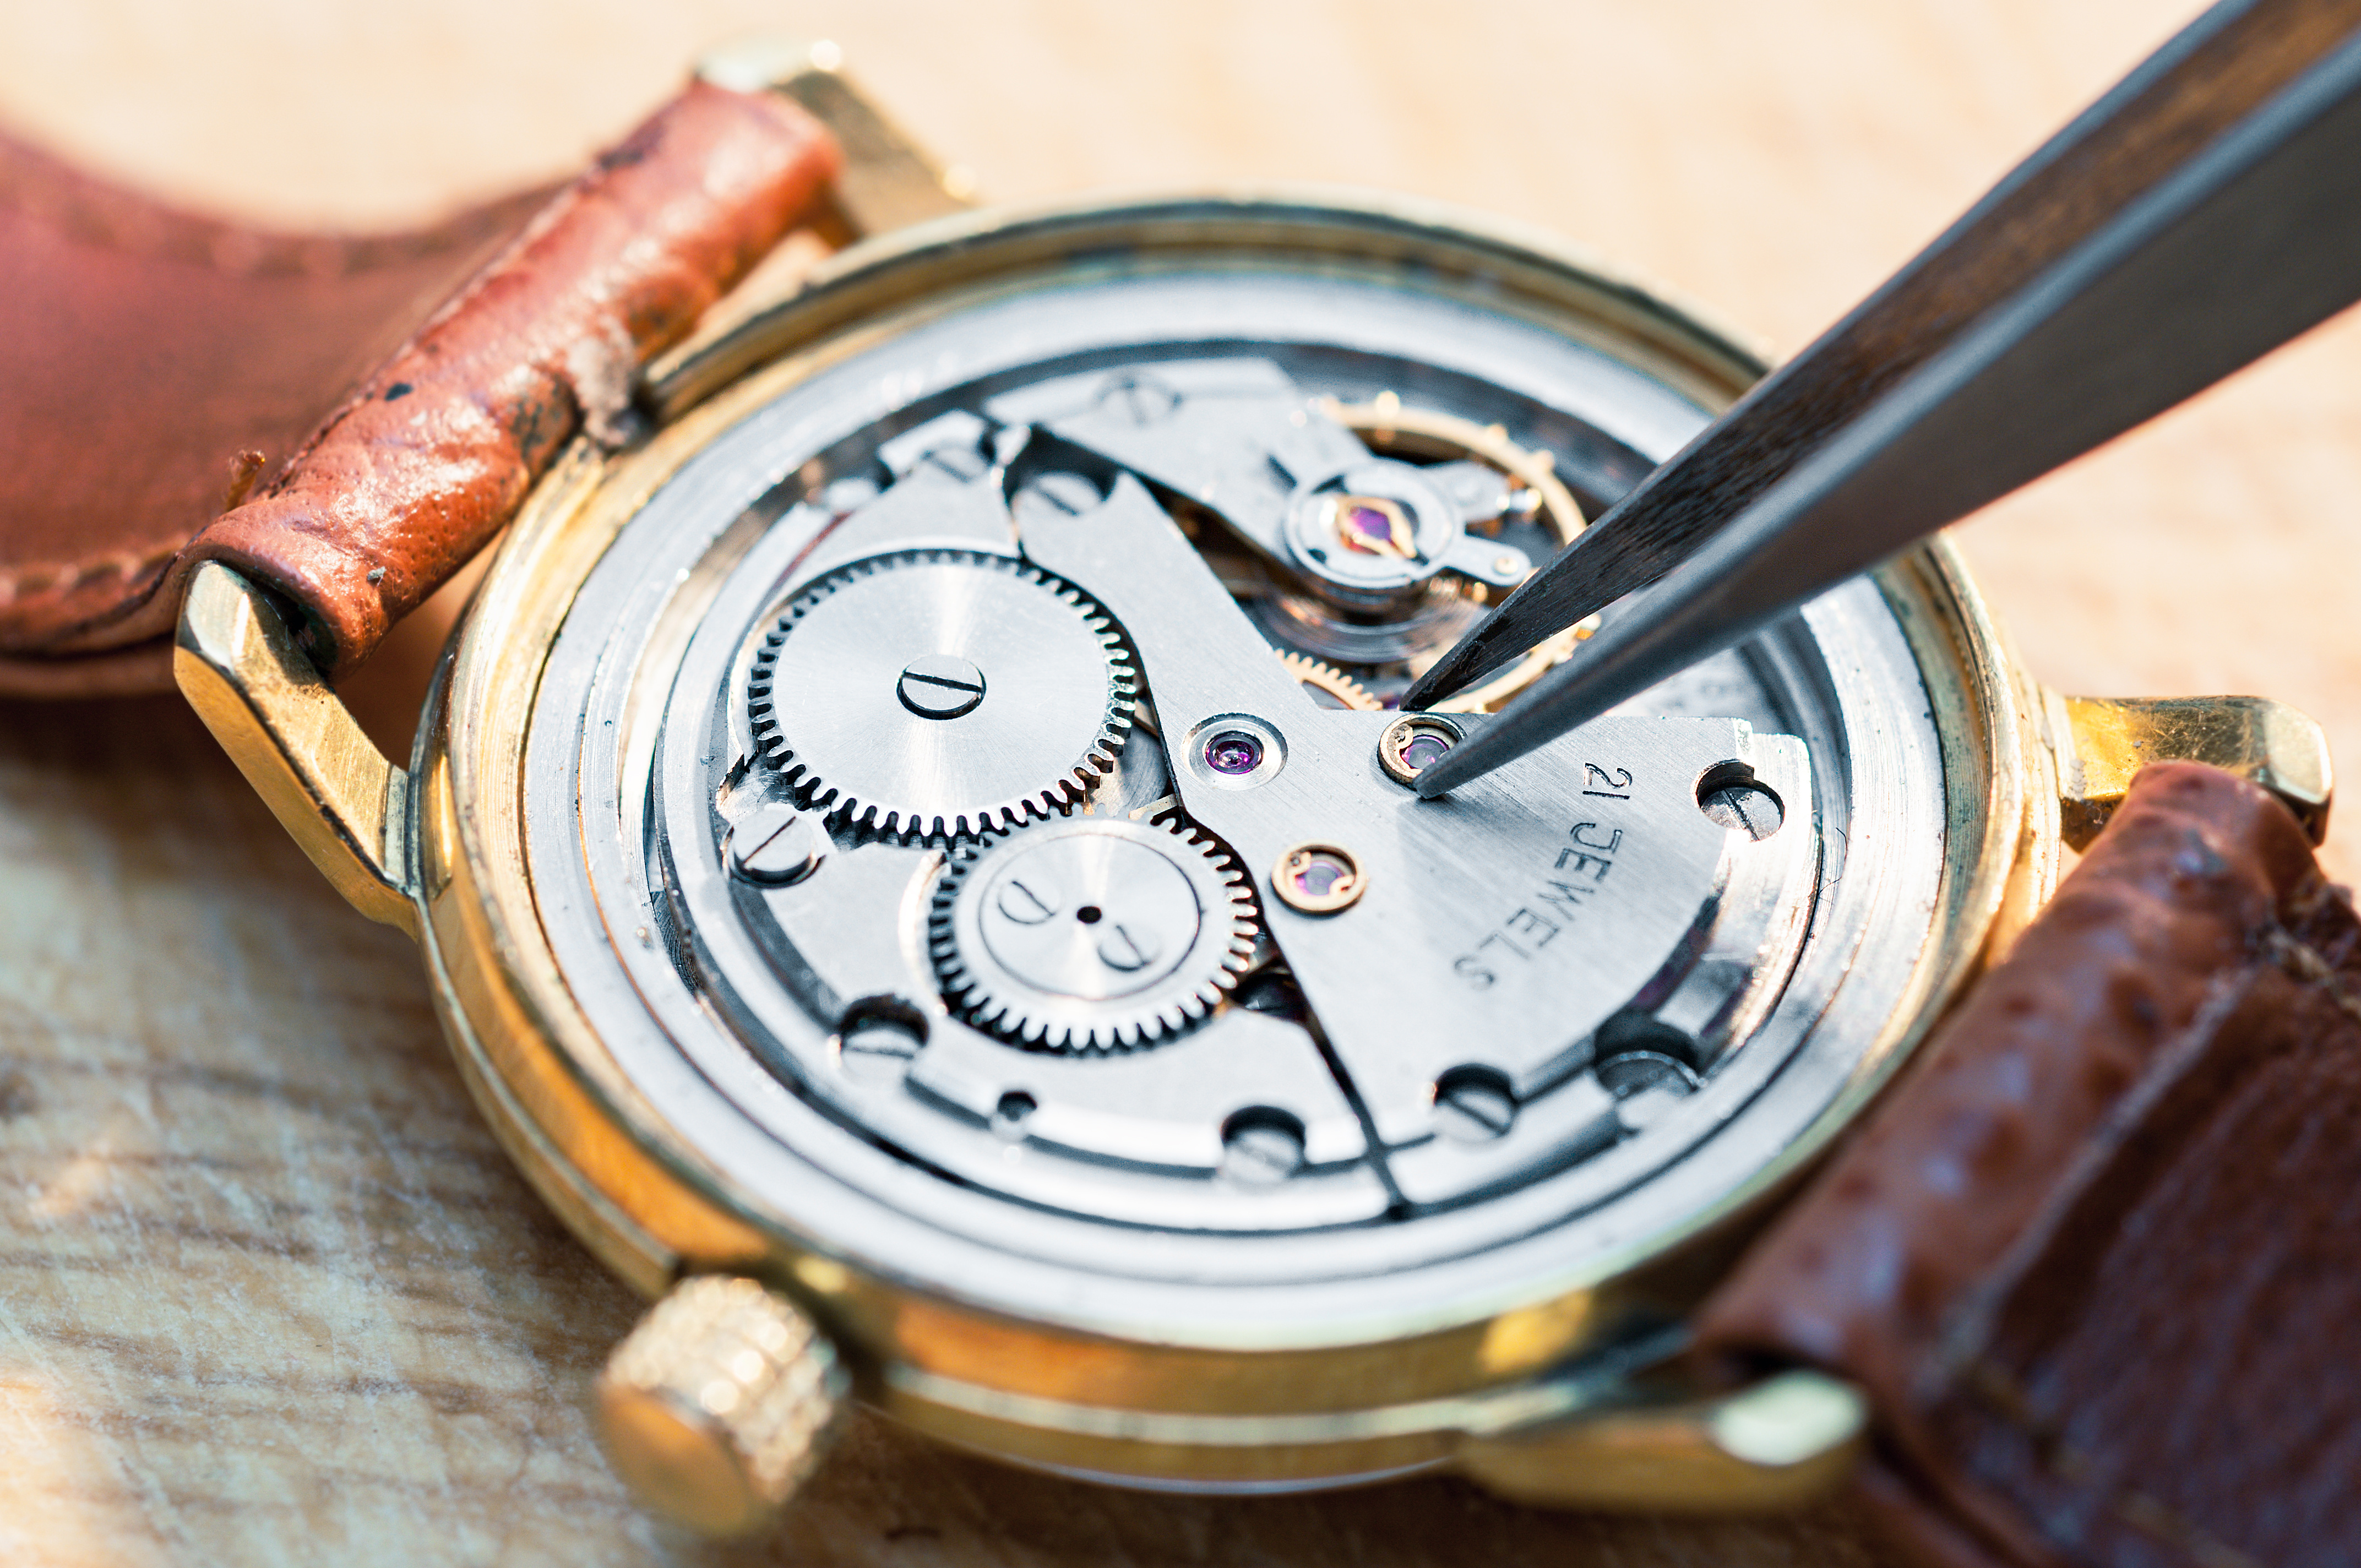 A gold watch with brown leather band appears open and you can see the mechanics of it.